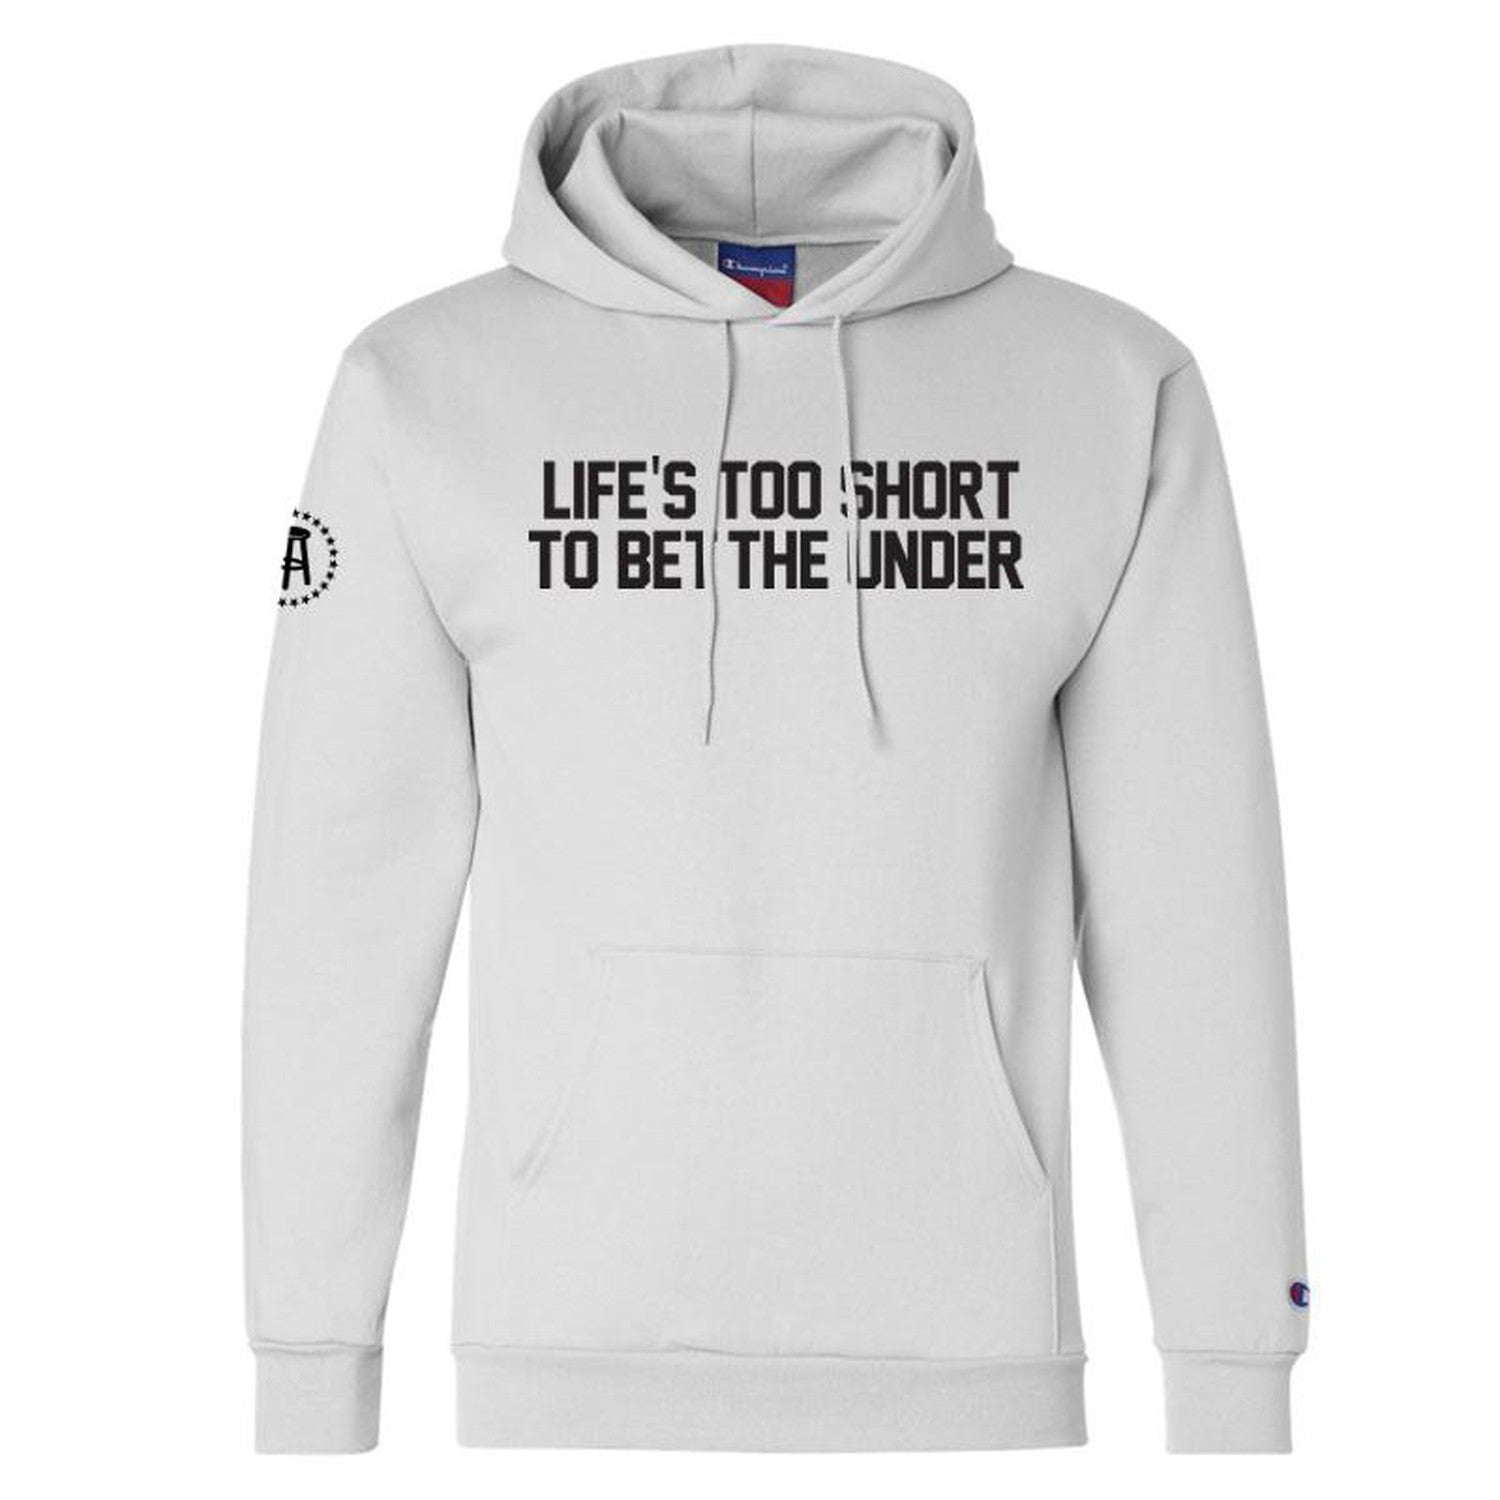 Life's Too Short To Bet The Under Hoodie-Hoodies-Barstool Sports-White-S-Barstool Sports